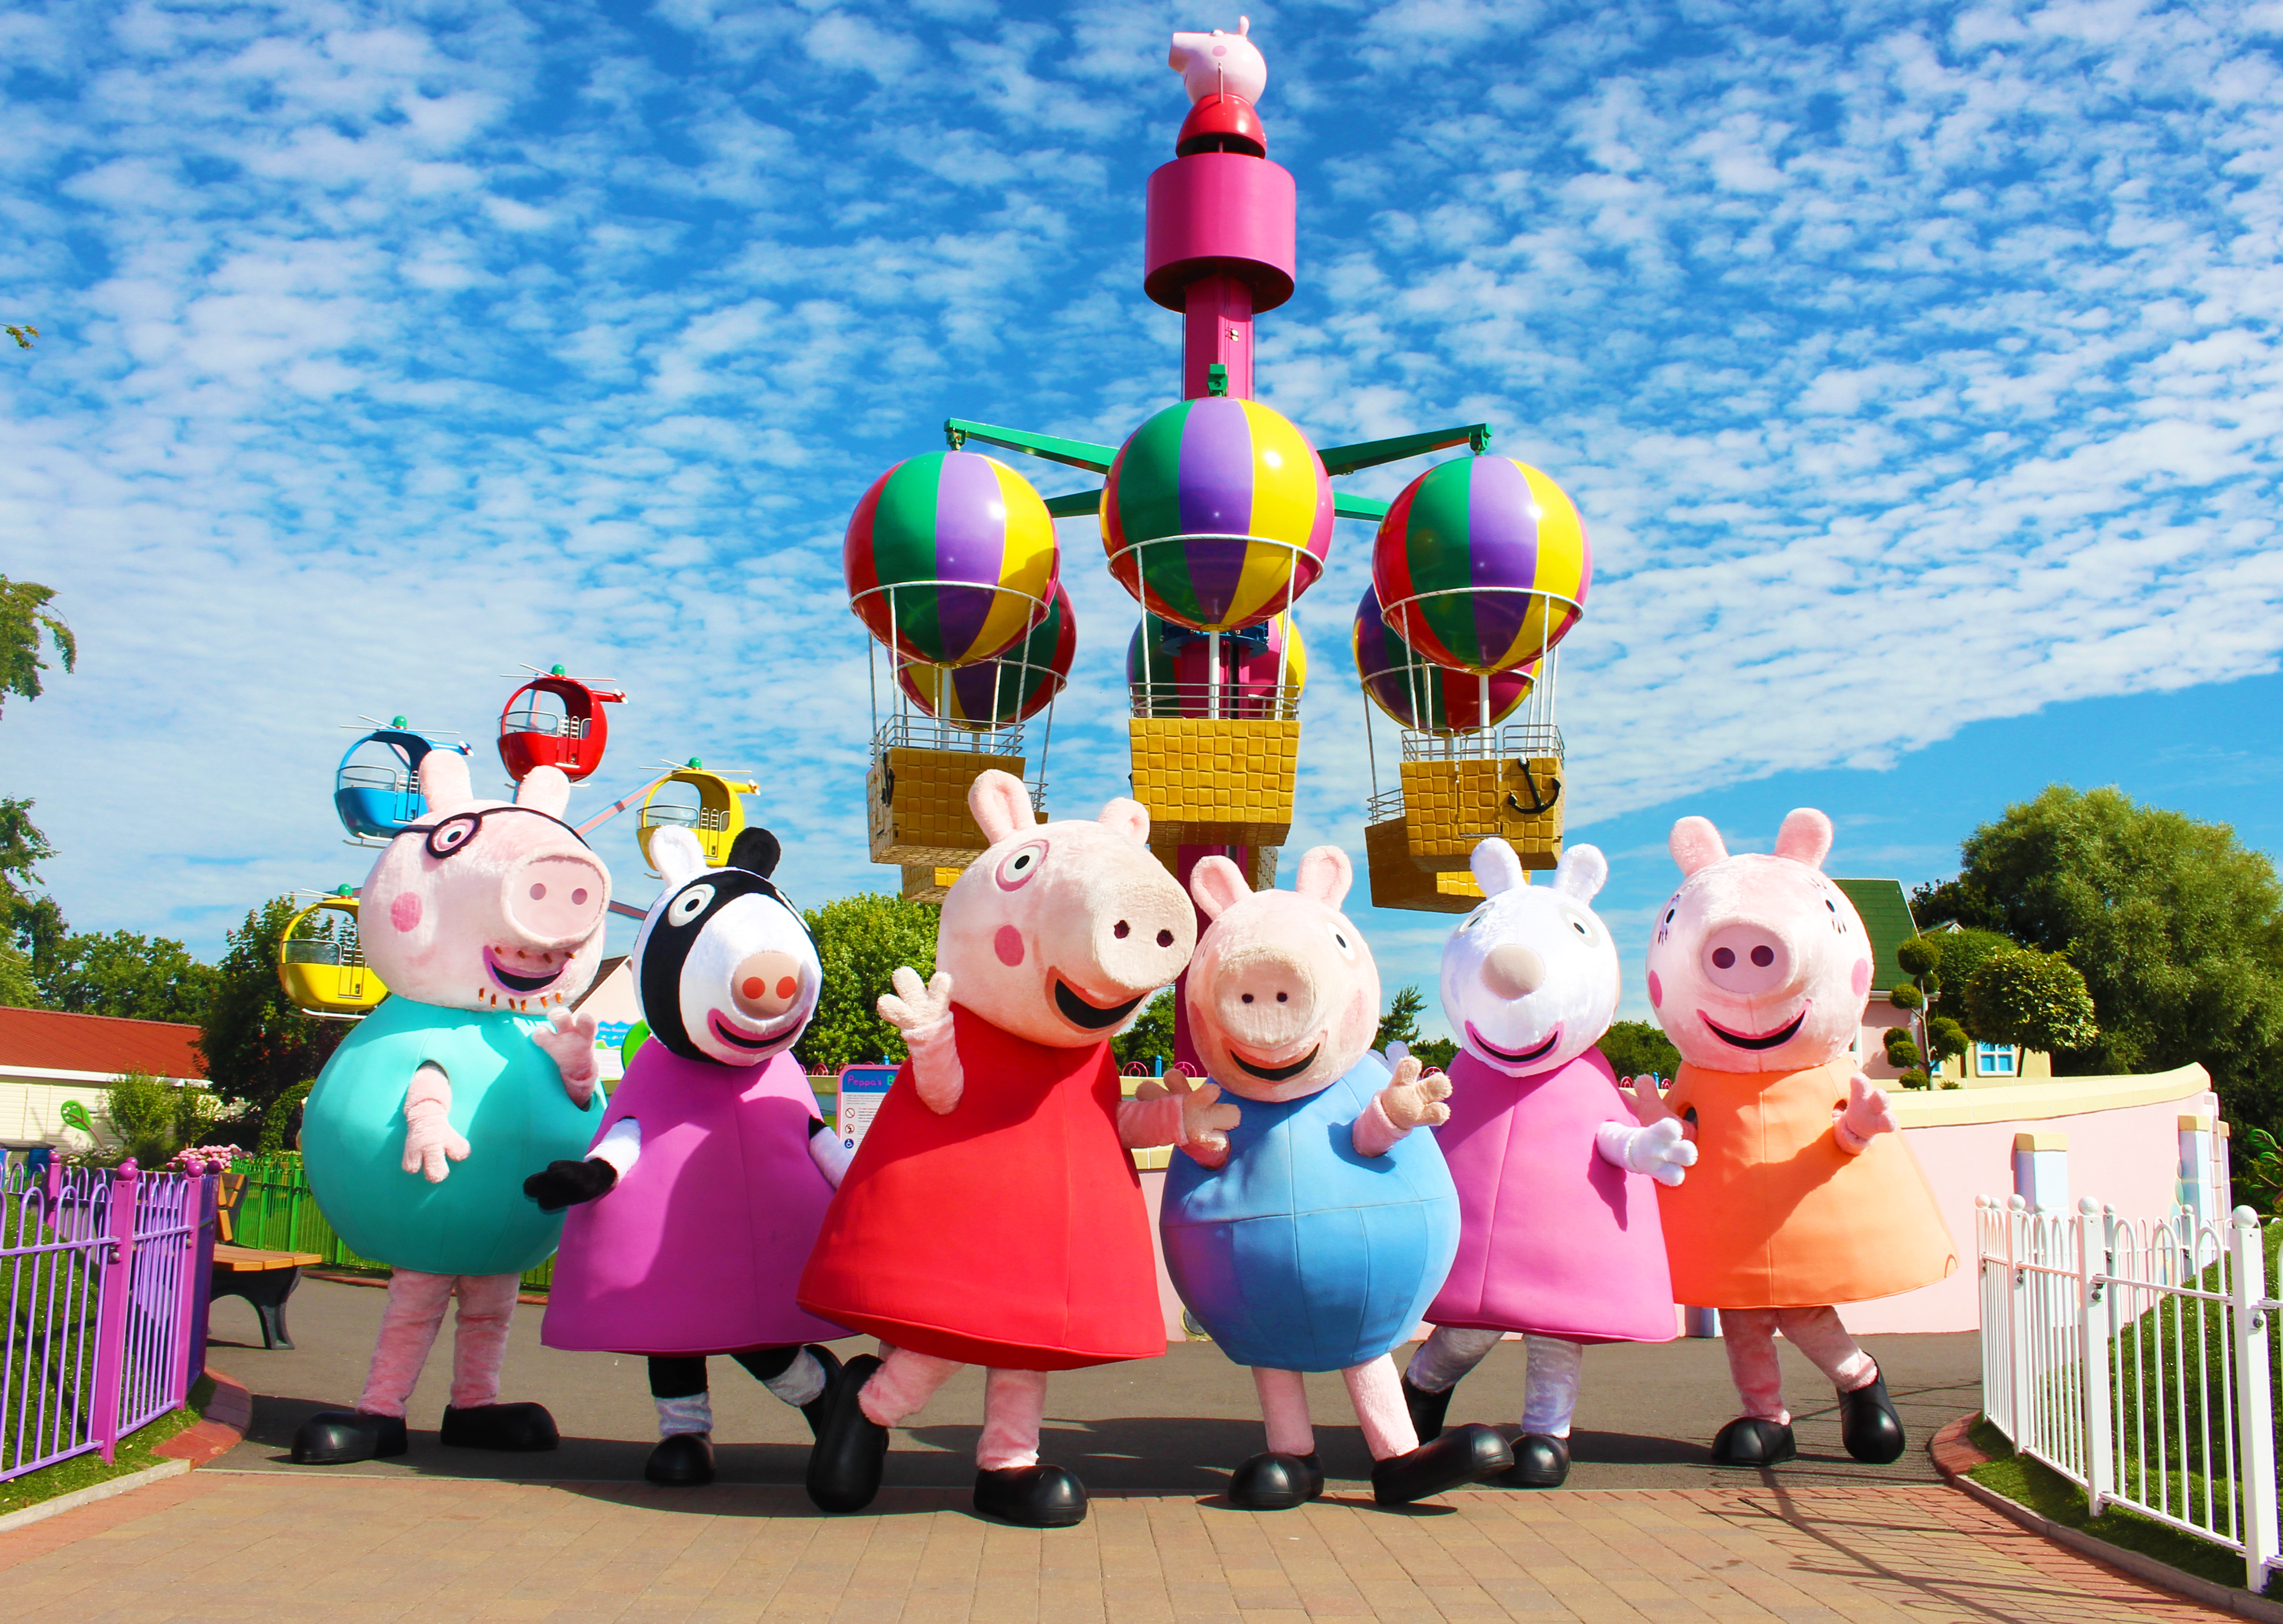 Get set for a cute welcome at Peppa Pig World